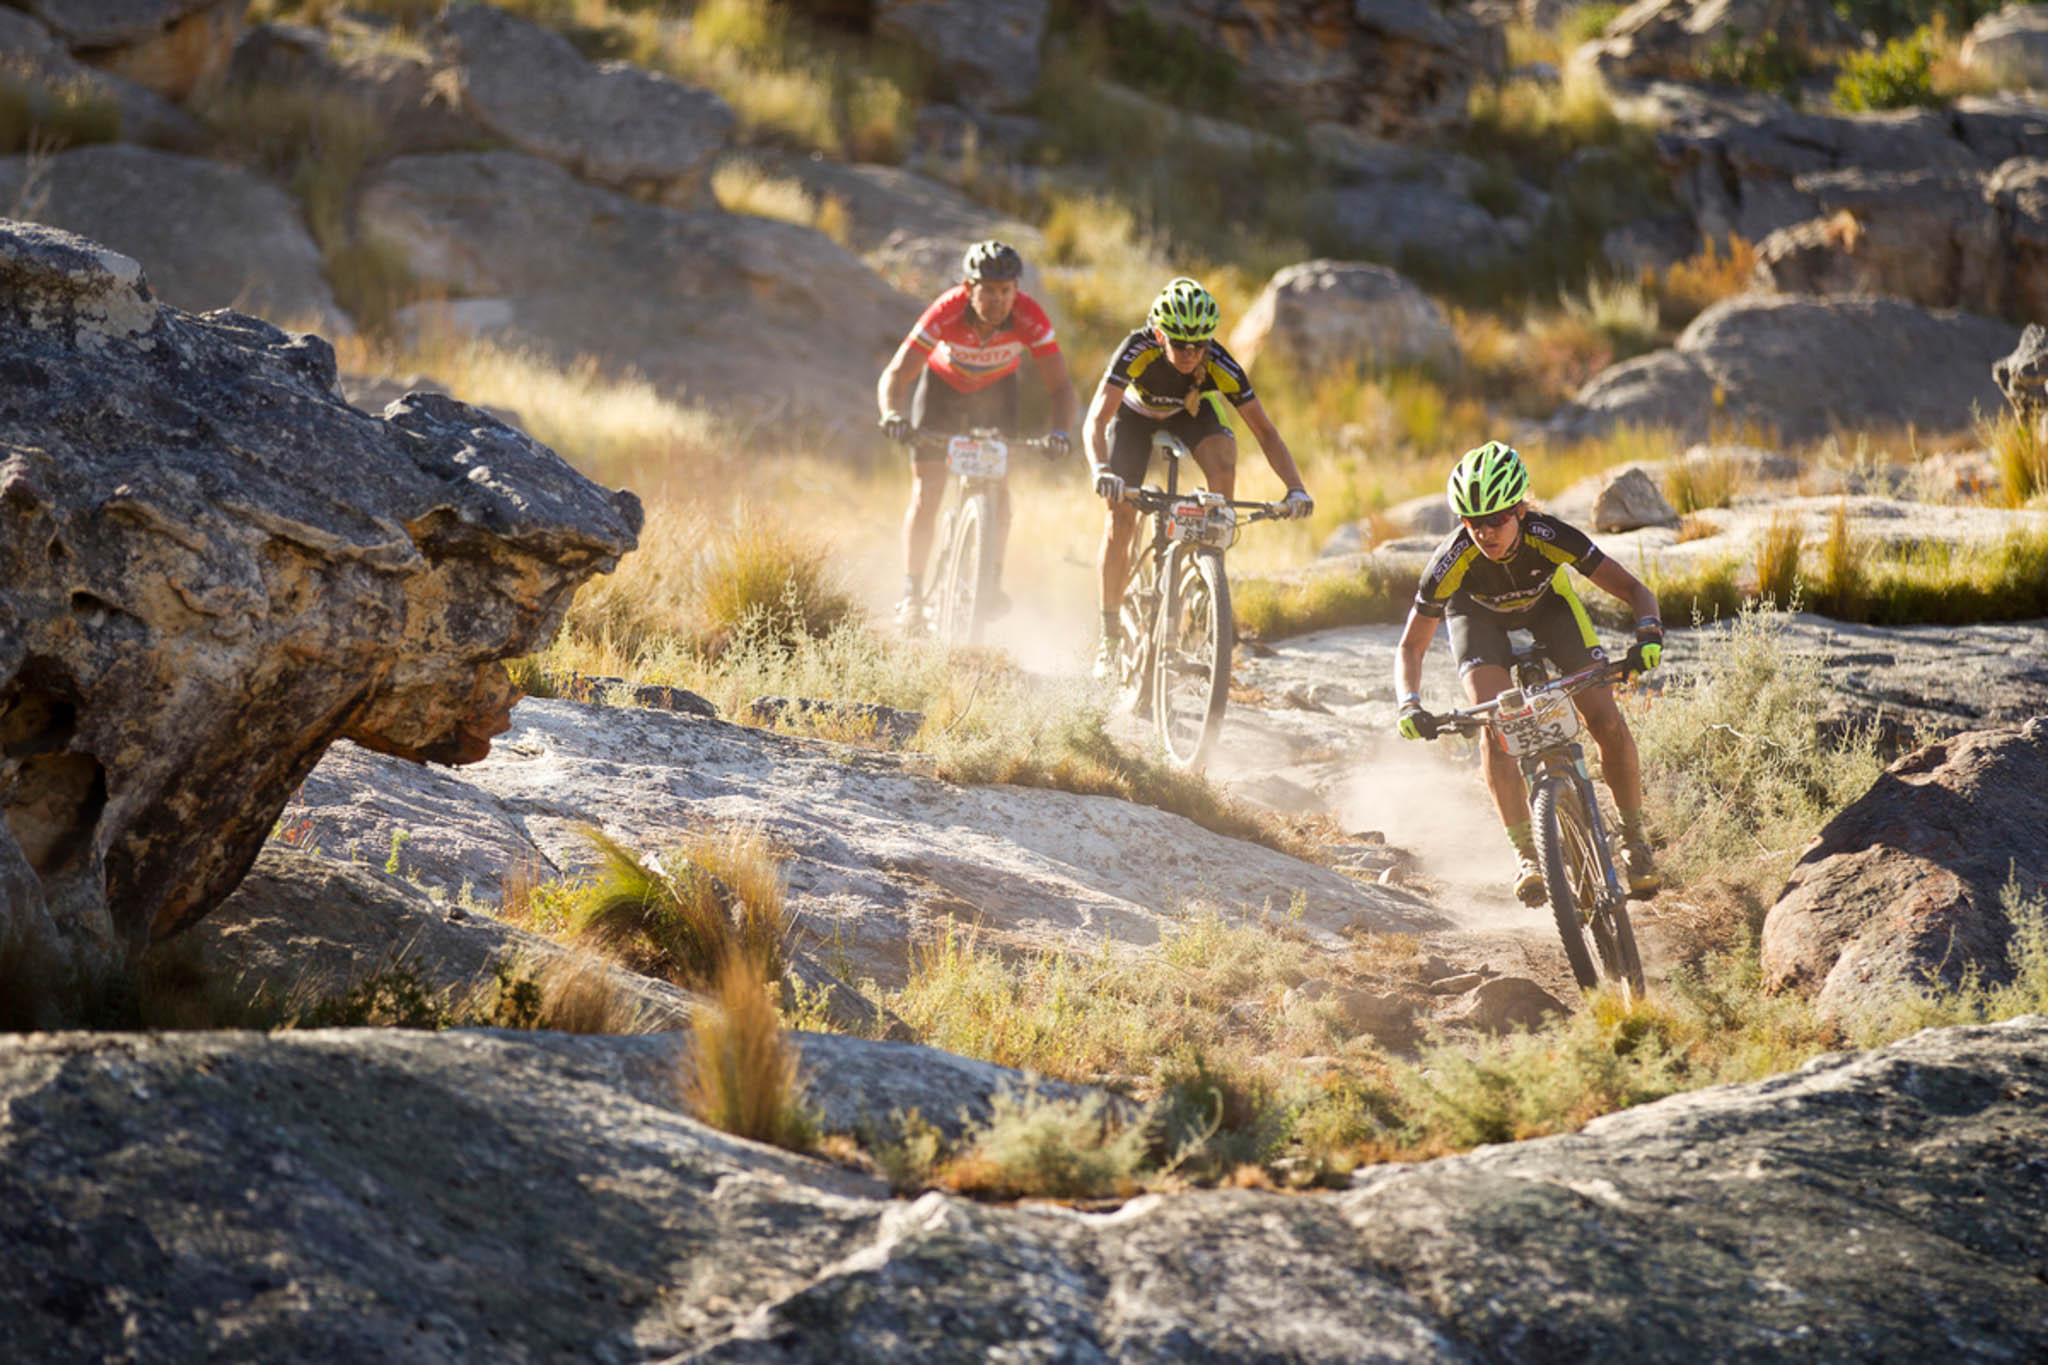 Adel Morath & Sally Bigham of Topeak Ergon during stage 2 of the 2016 Absa Cape Epic Mountain Bike stage race from Saronsberg Wine Estate in Tulbagh, South Africa on the 15th March 2016 Photo by Gary Perkin/Cape Epic/SPORTZPICS PLEASE ENSURE THE APPROPRIATE CREDIT IS GIVEN TO THE PHOTOGRAPHER AND SPORTZPICS ALONG WITH THE ABSA CAPE EPIC ace2016